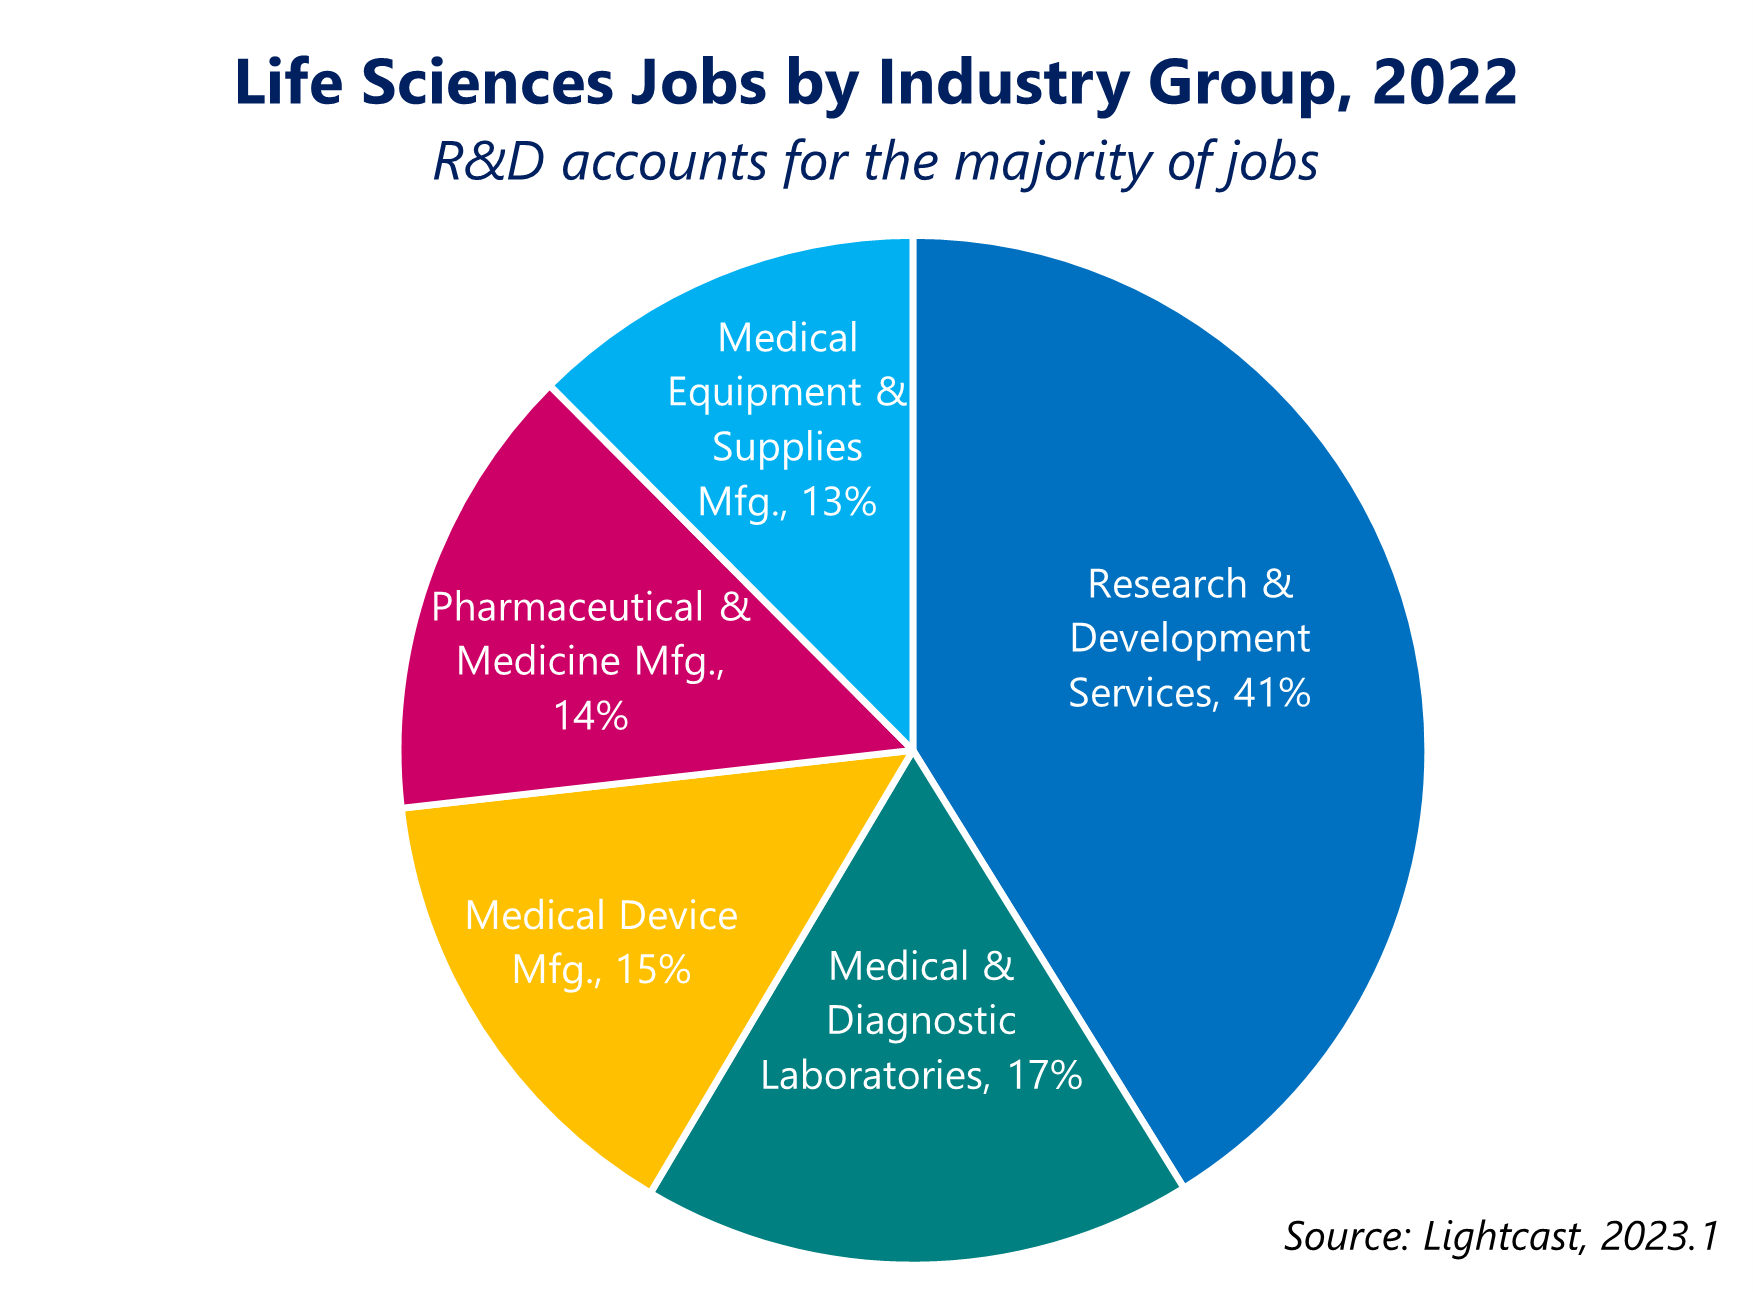 Life Sciences jobs by industry group in 2022